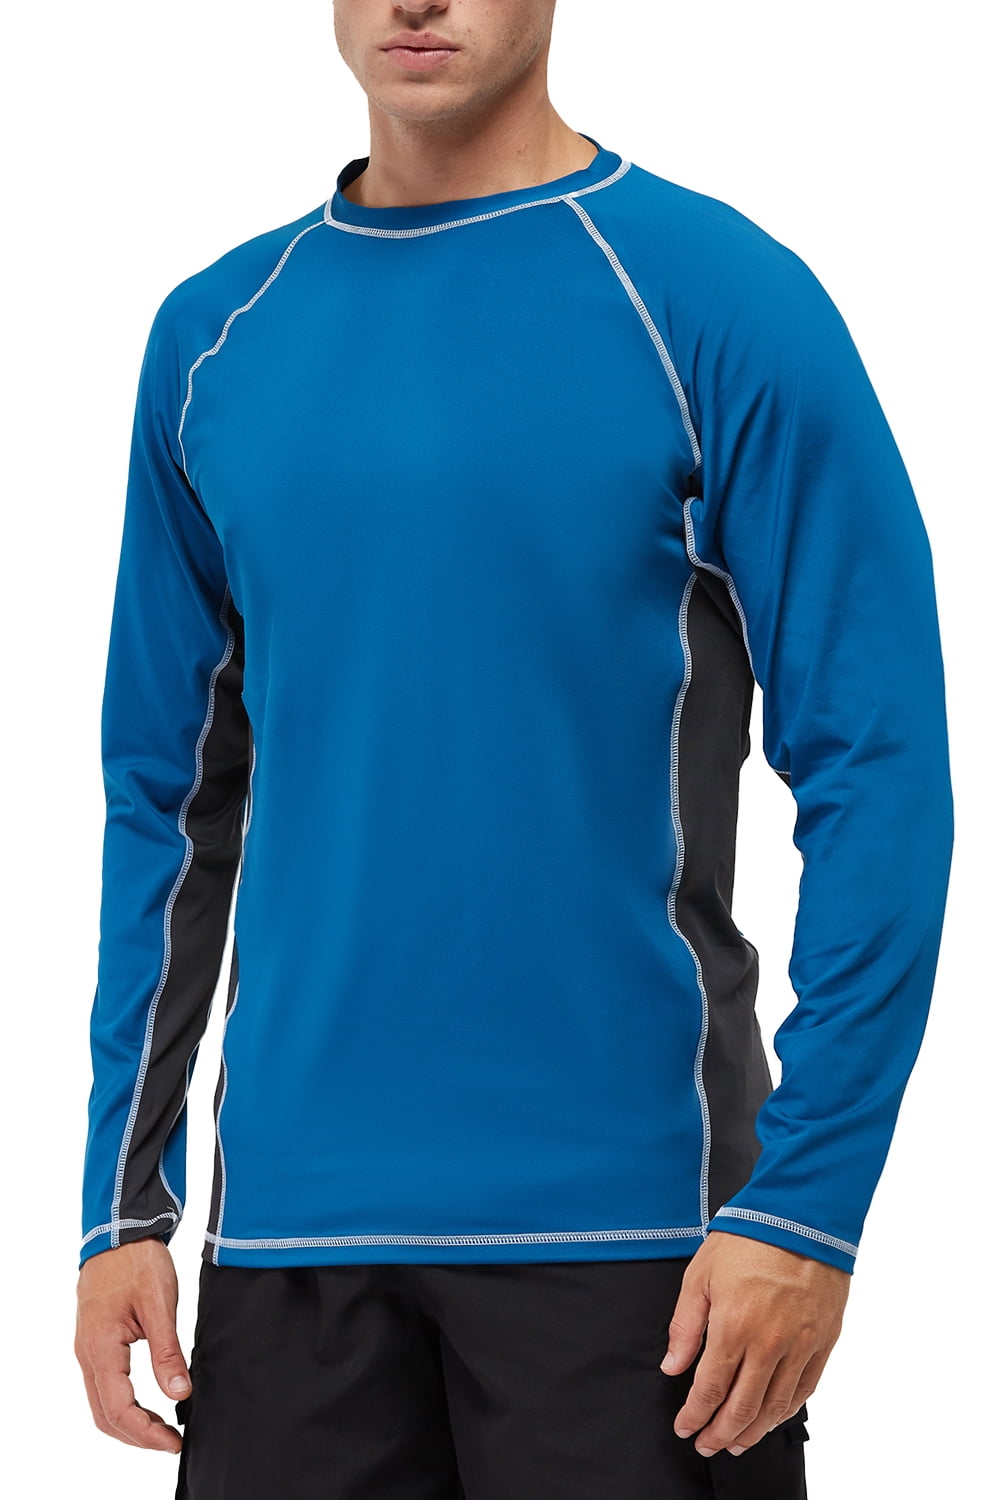 Gillz Fishing Shirt with Uv Protection for Men, Tournament Series V2 Gear